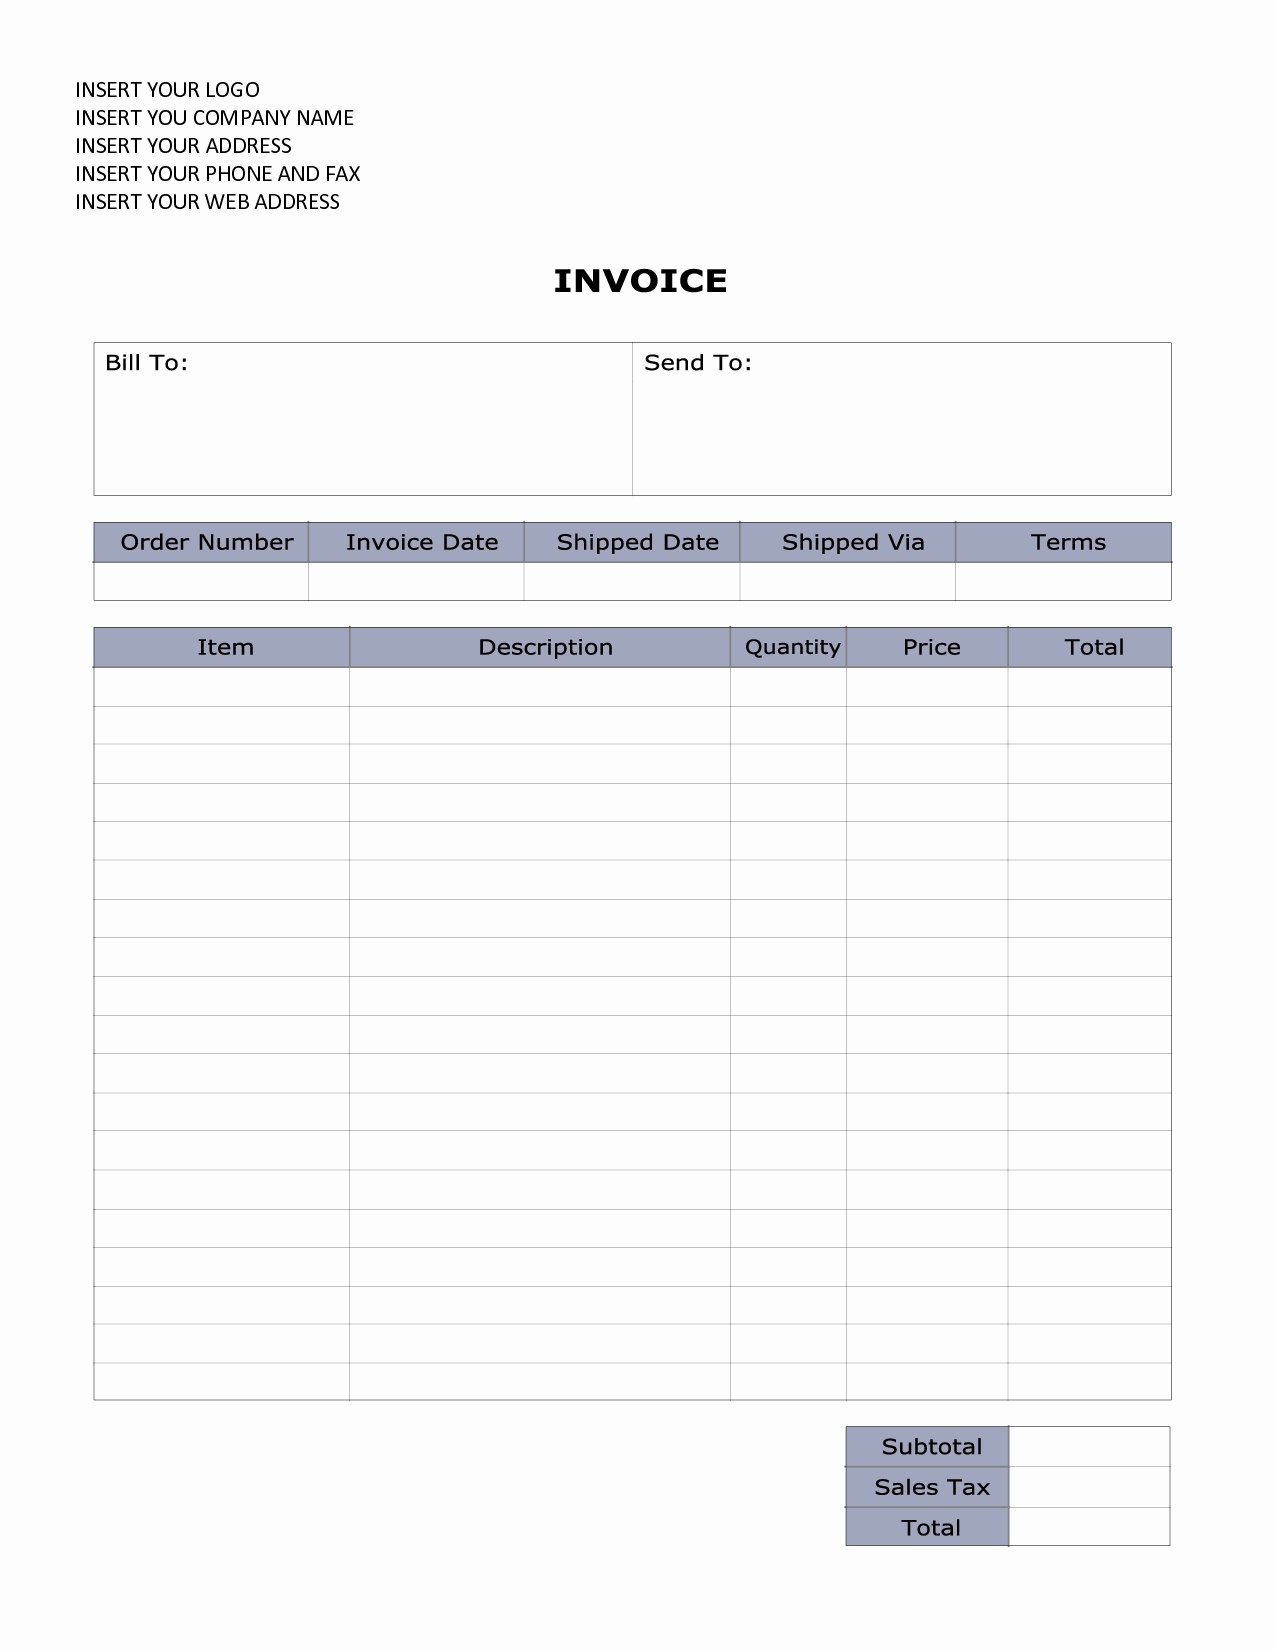 Free Printable Invoices Forms Free Templates – Wfac.ca - Free Printable Invoices